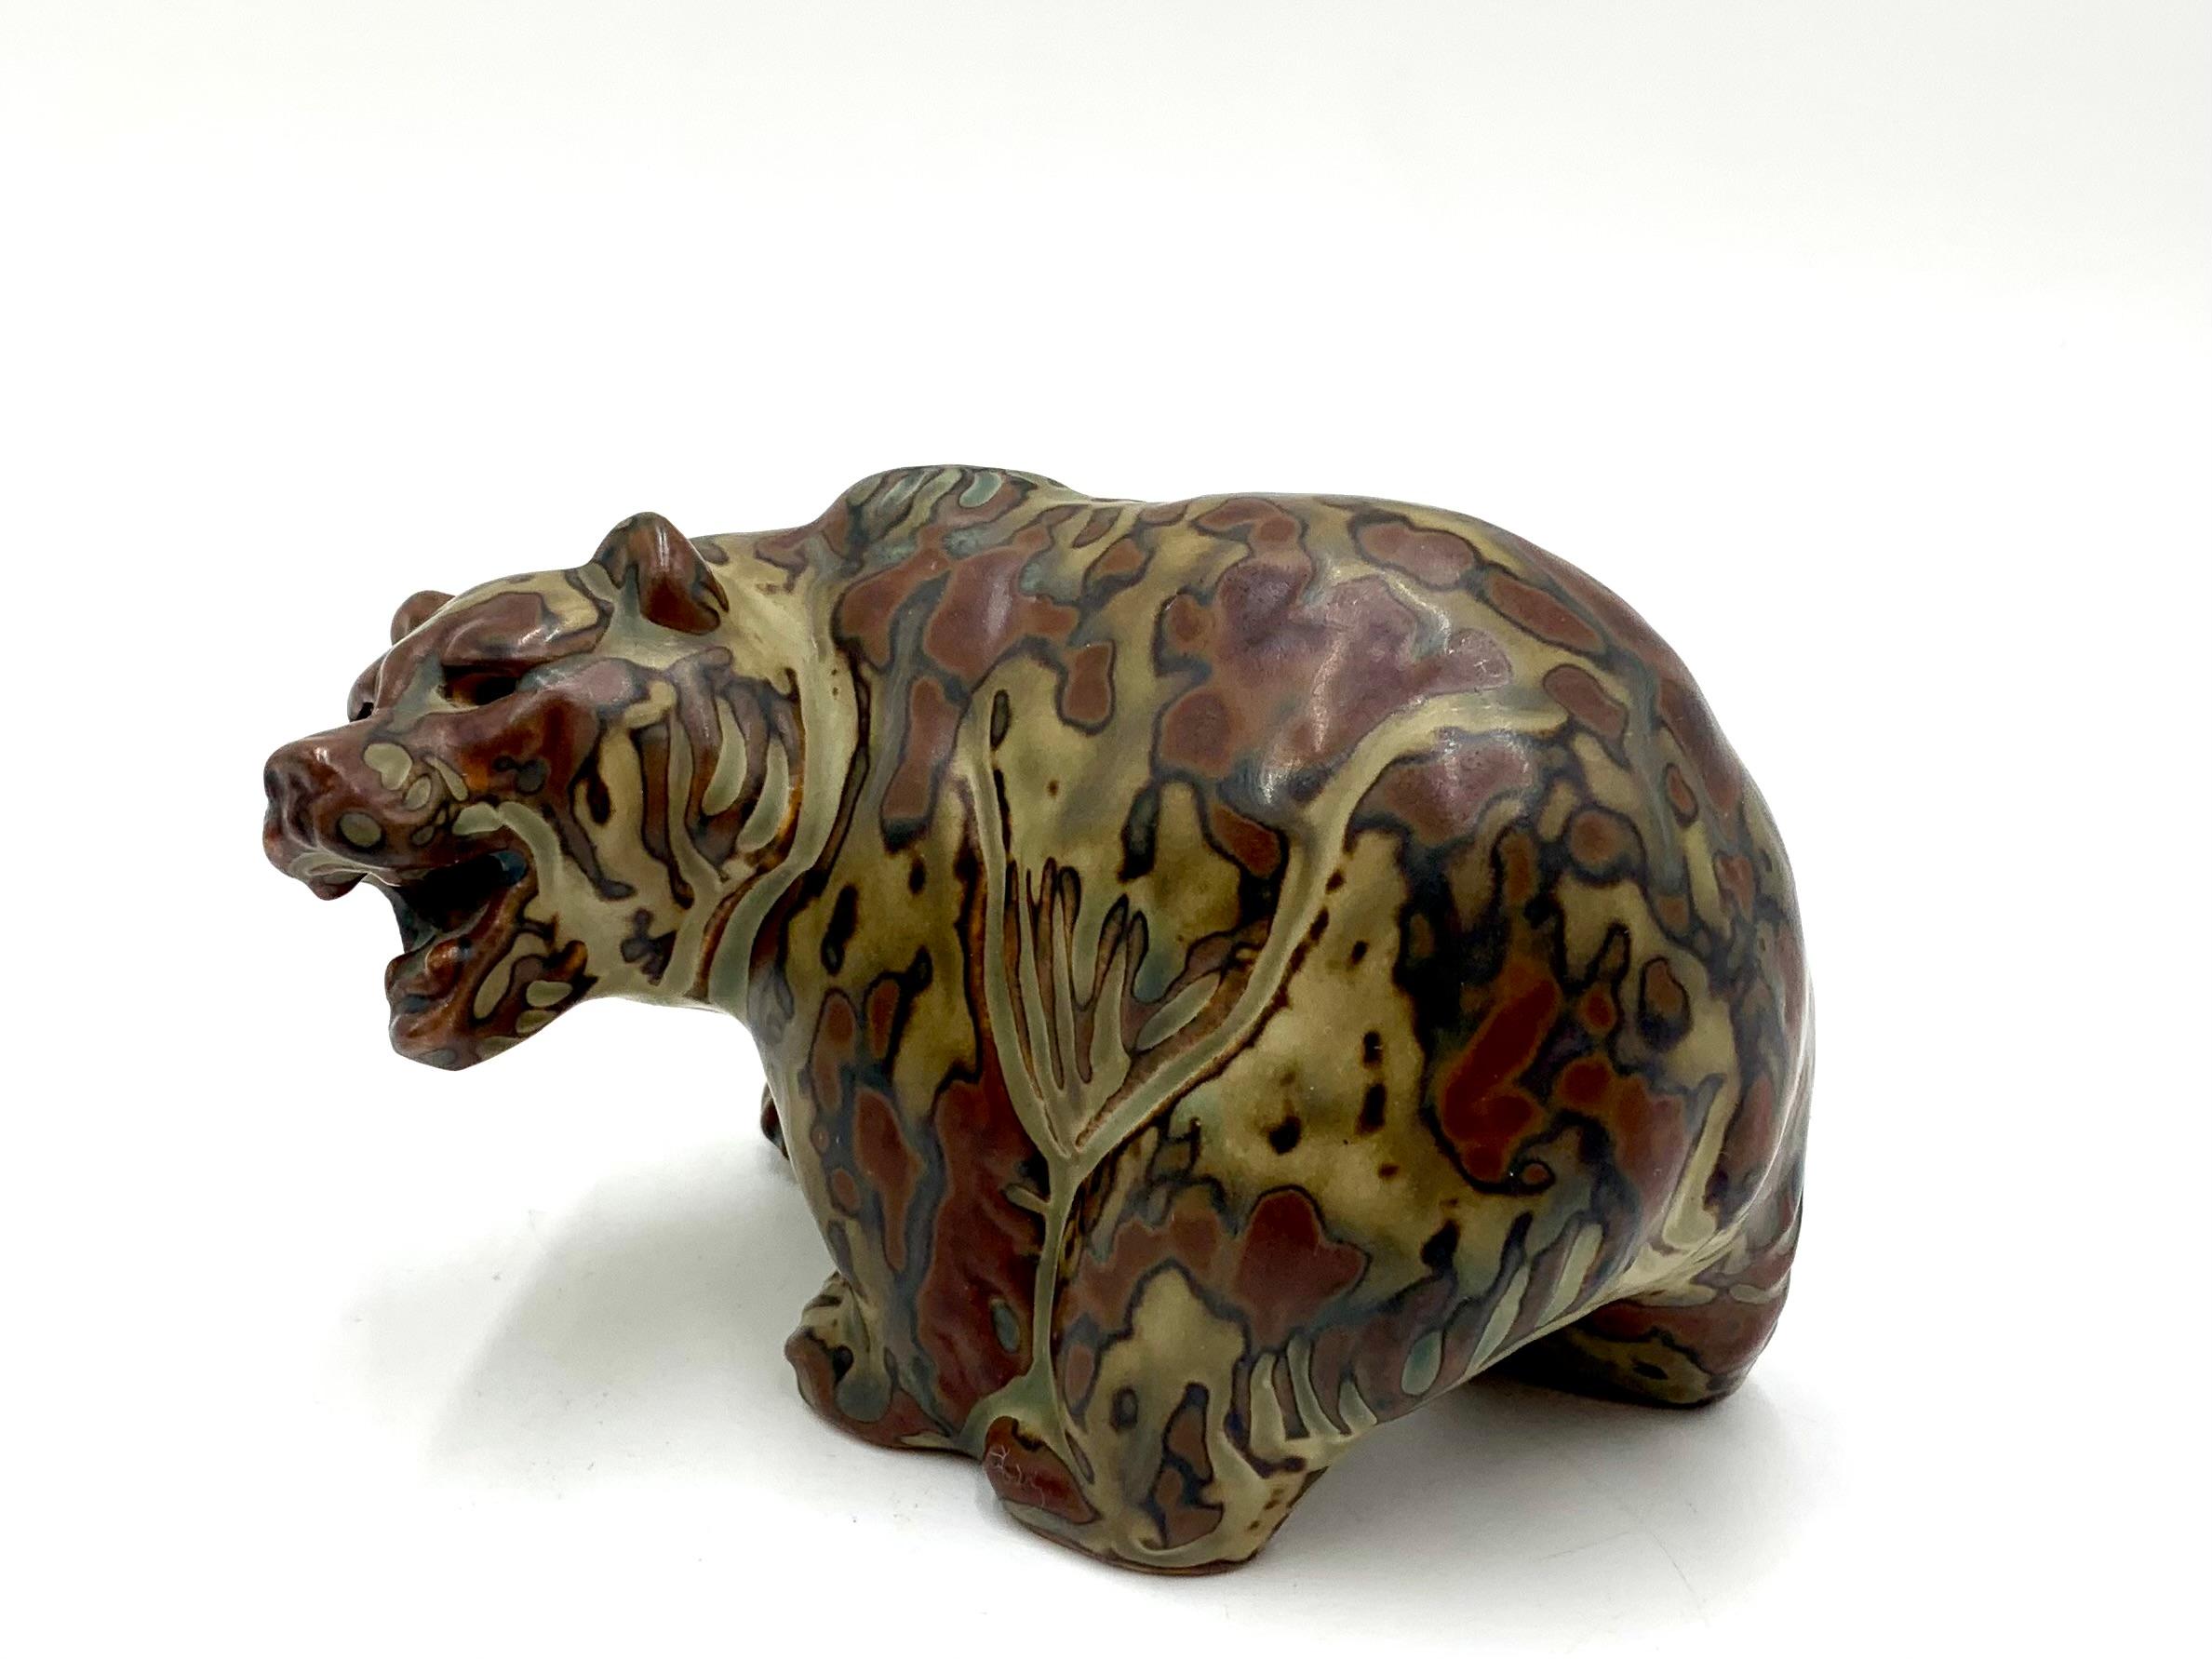 Ceramic bear figurine by Knud Kyhn, produced by the Danish Royal Copenhagen porcelain factory

In perfect condition, no visible scratches or dents.

Produced in the 1950s, Knud Kyhn 1880-1969 was a Danish painter, artist and ceramic sculptor who